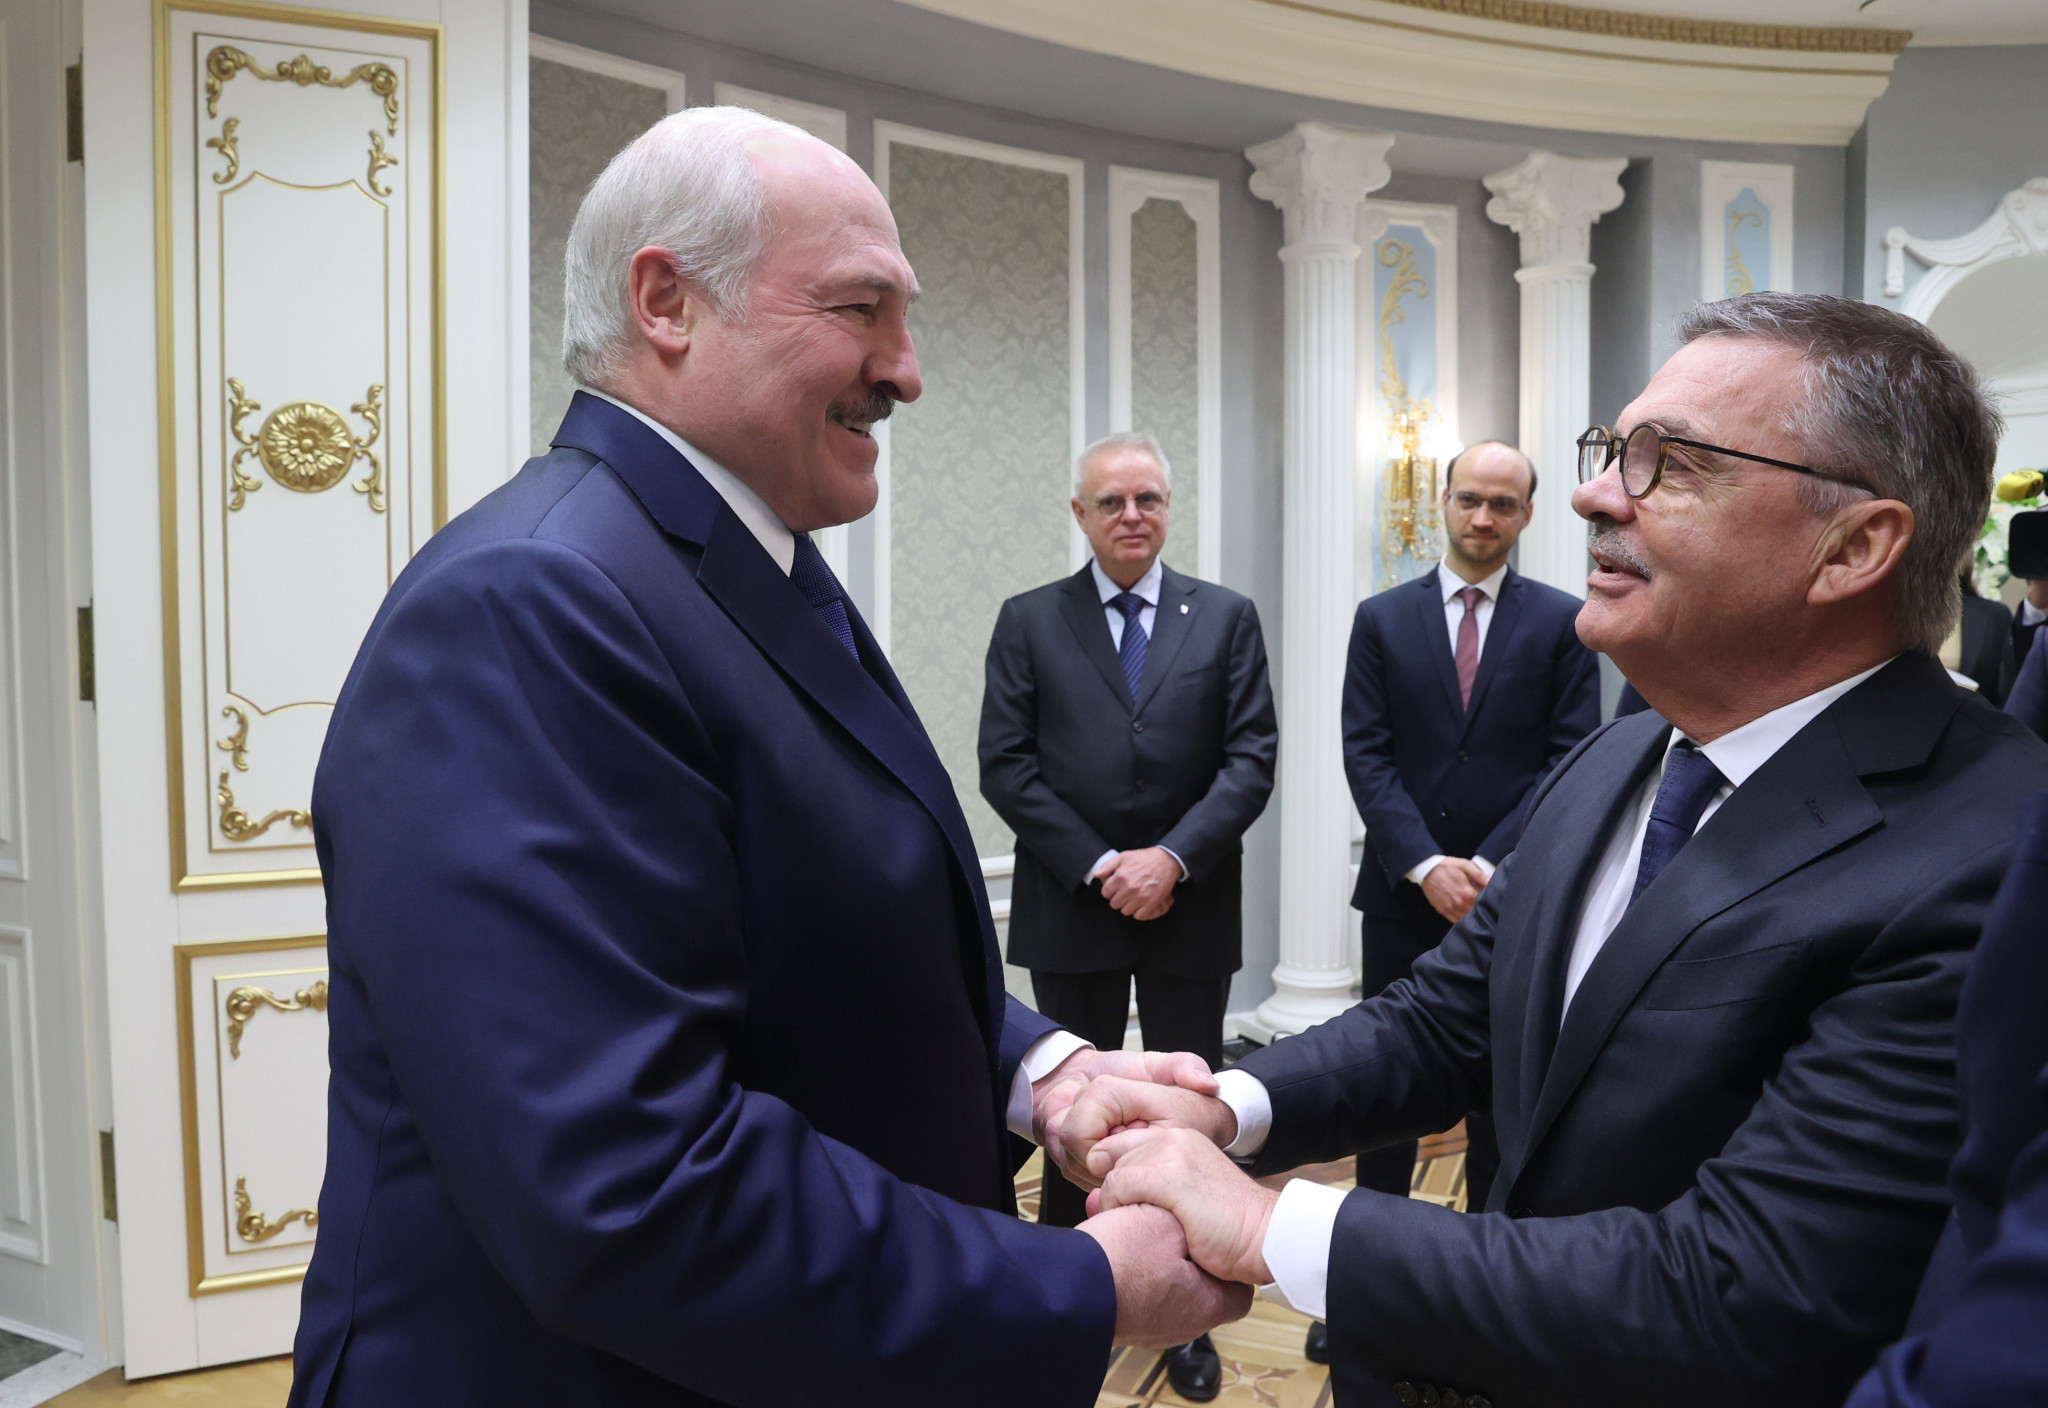 Fasel (right) met with Belarus President Alexander Lukashenko this week, with the purpose of opening and maintaining a constructive dialogue on the IIHF World Championships ©Getty Images